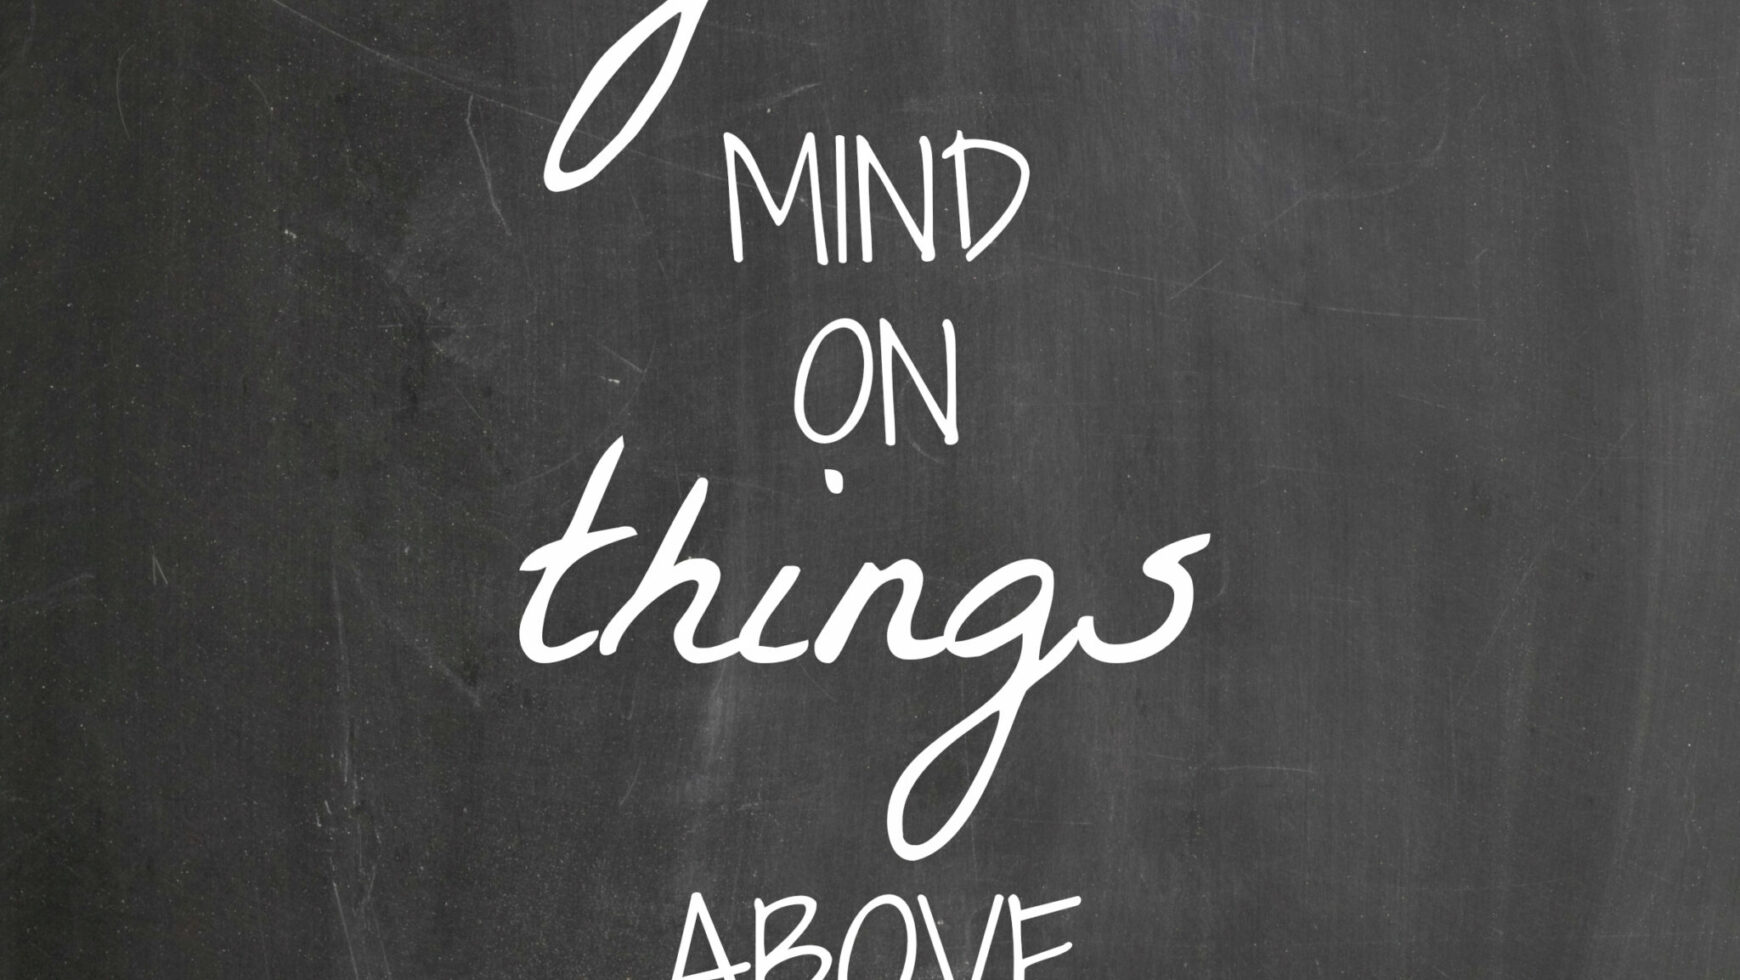 Set your mind on things above